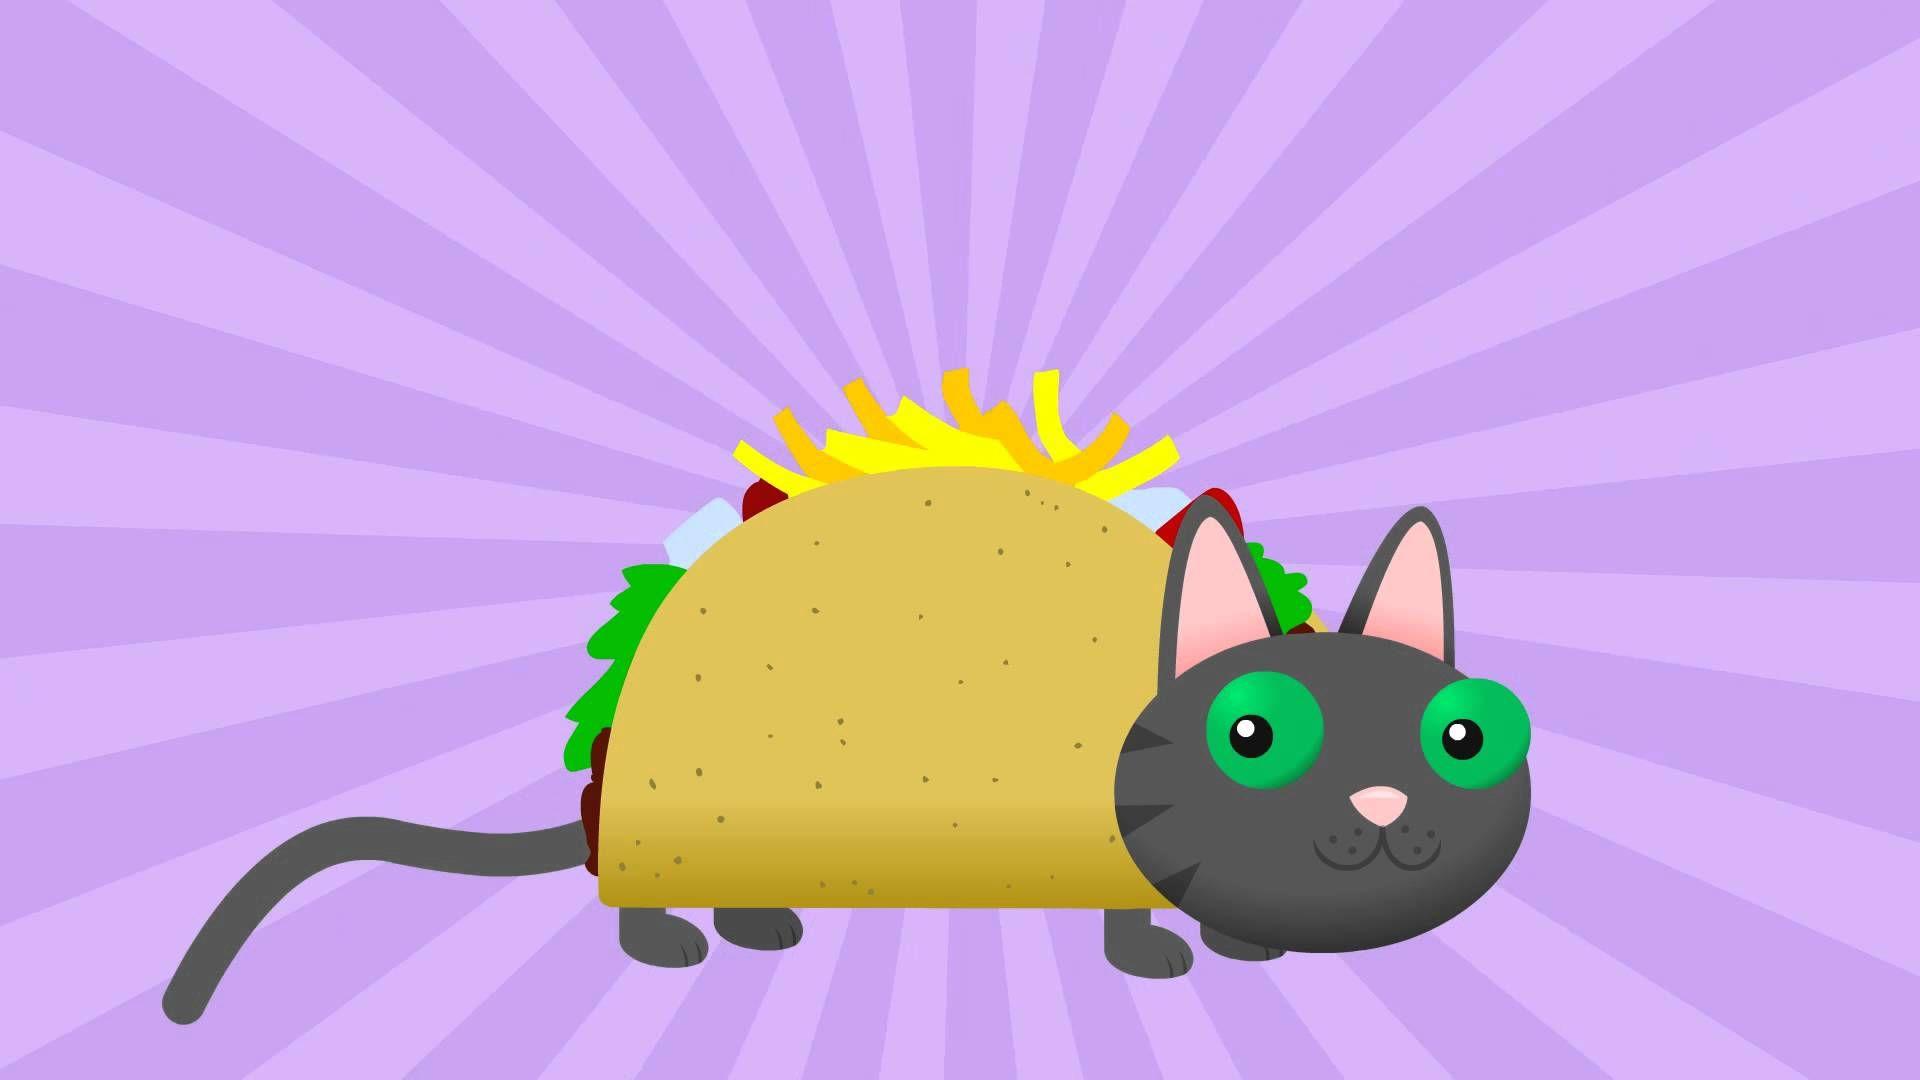 TACOCAT', An Animated Music Video About a Cat Made Out of a